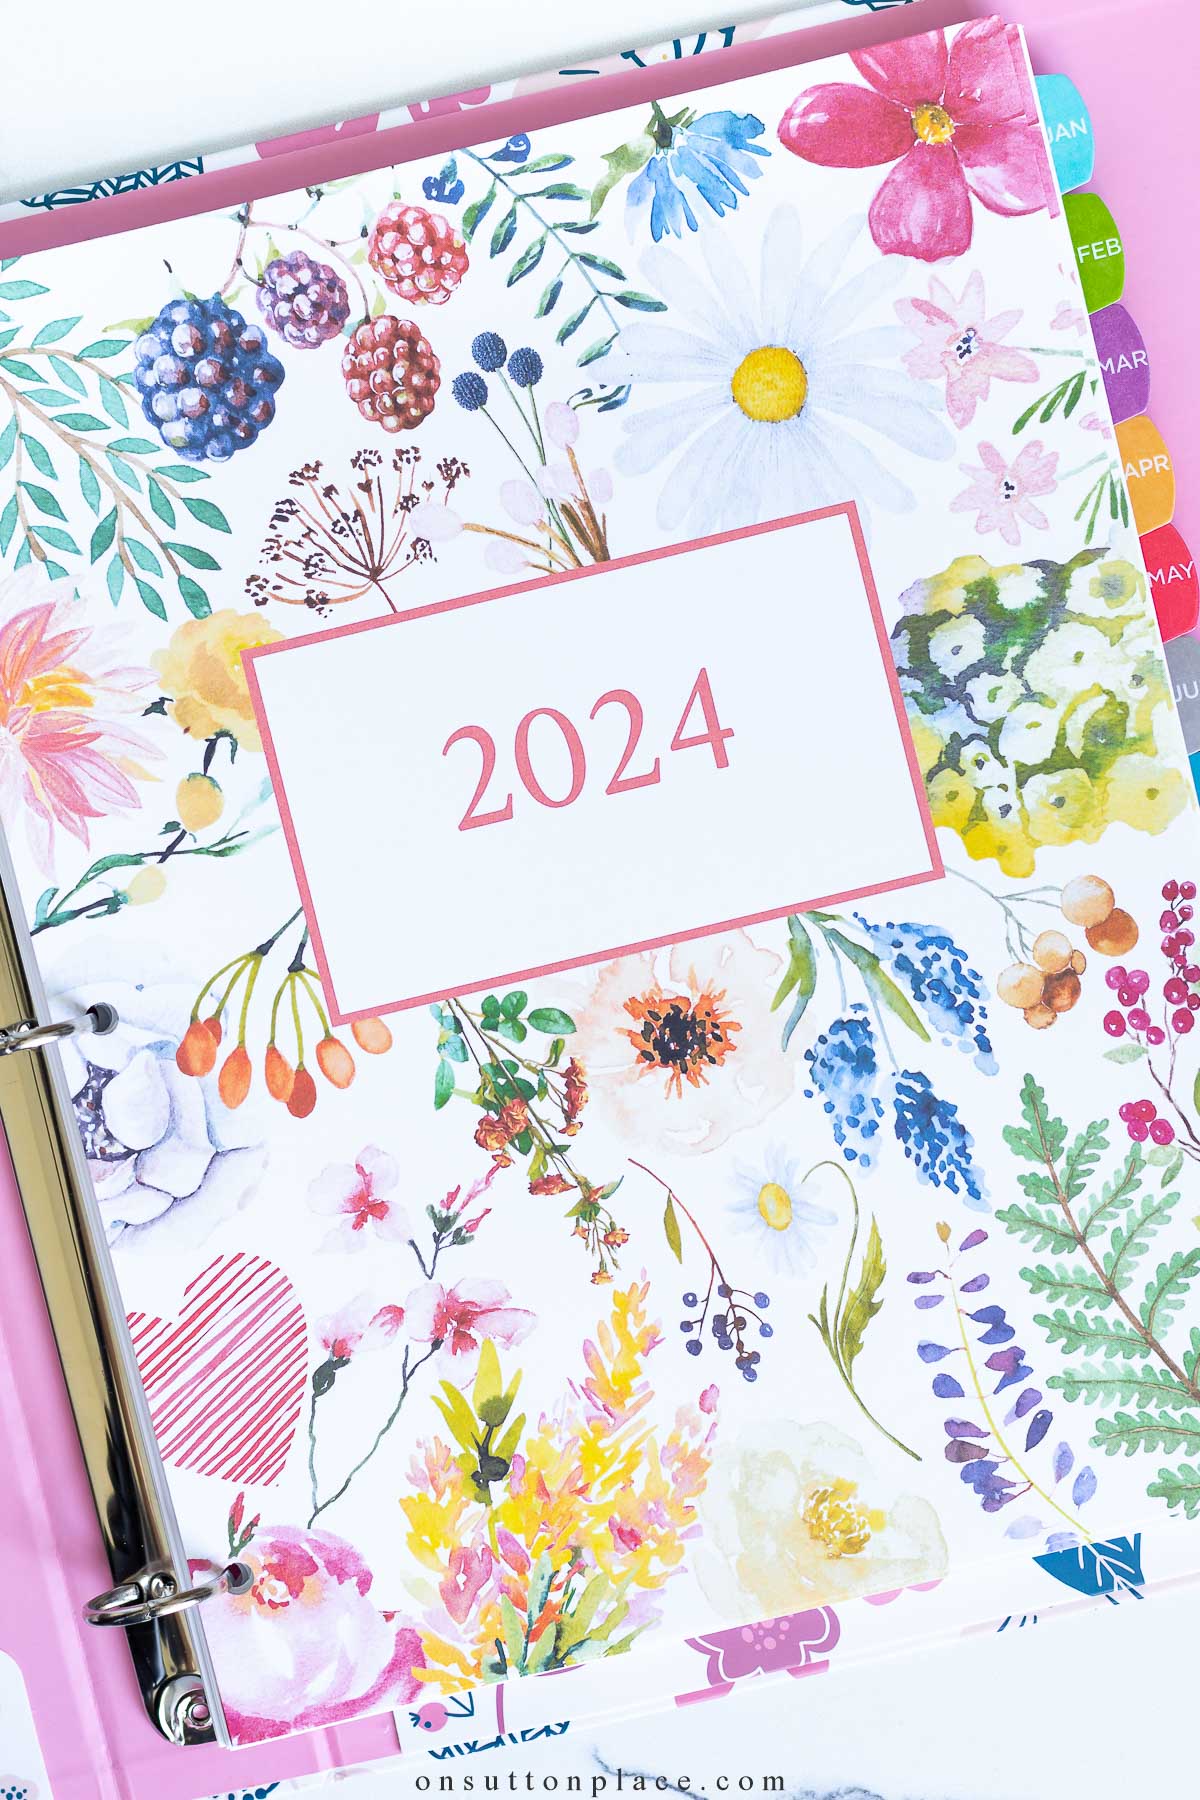 2024-free-printable-calendar-with-planner-pages-on-sutton-place